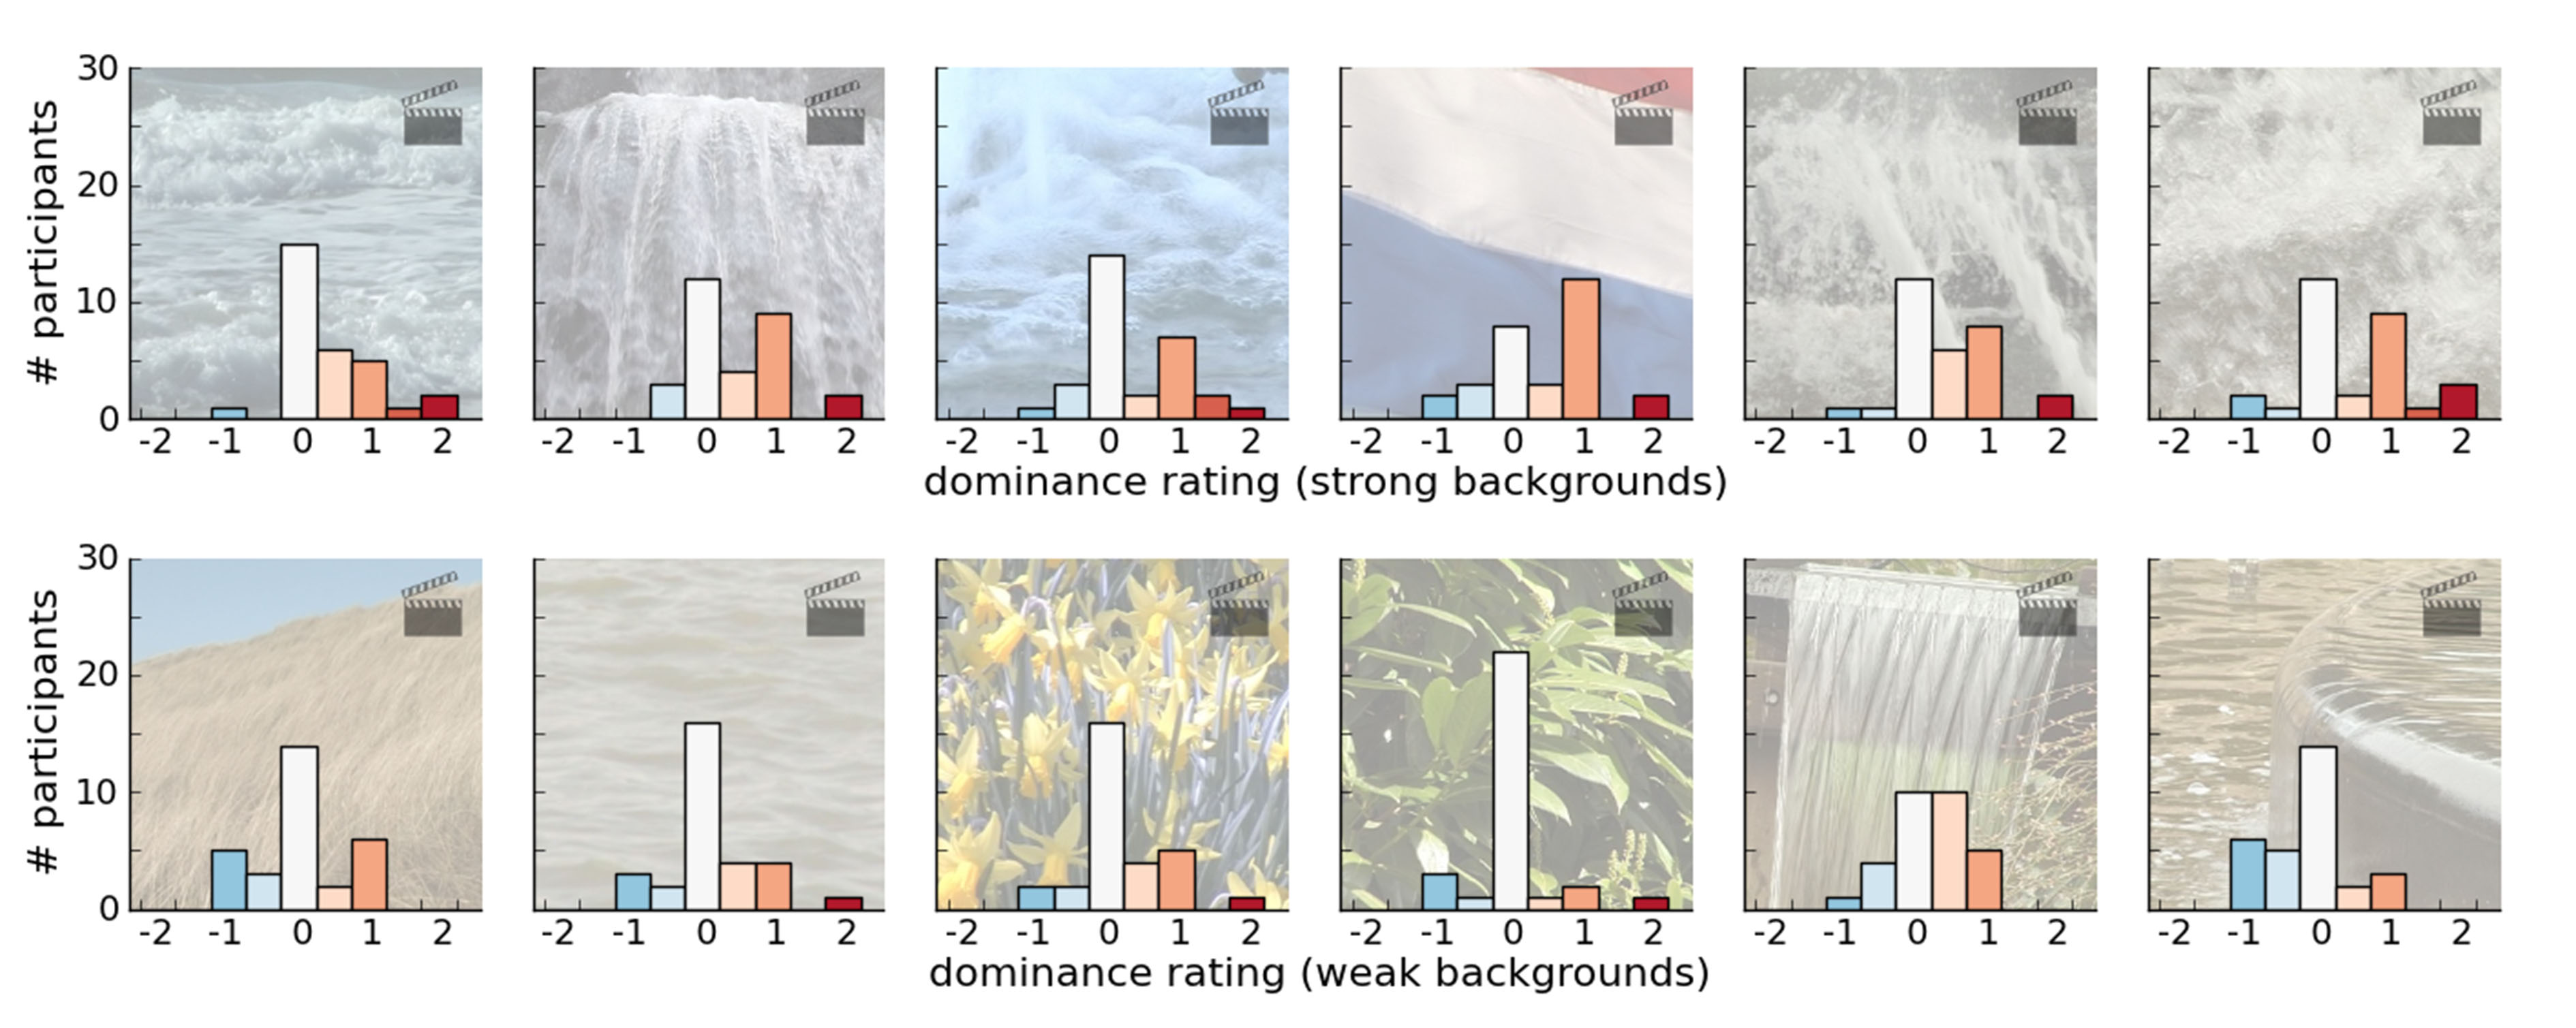 Natural Dynamic Background Affect Perceived Facial Dominance